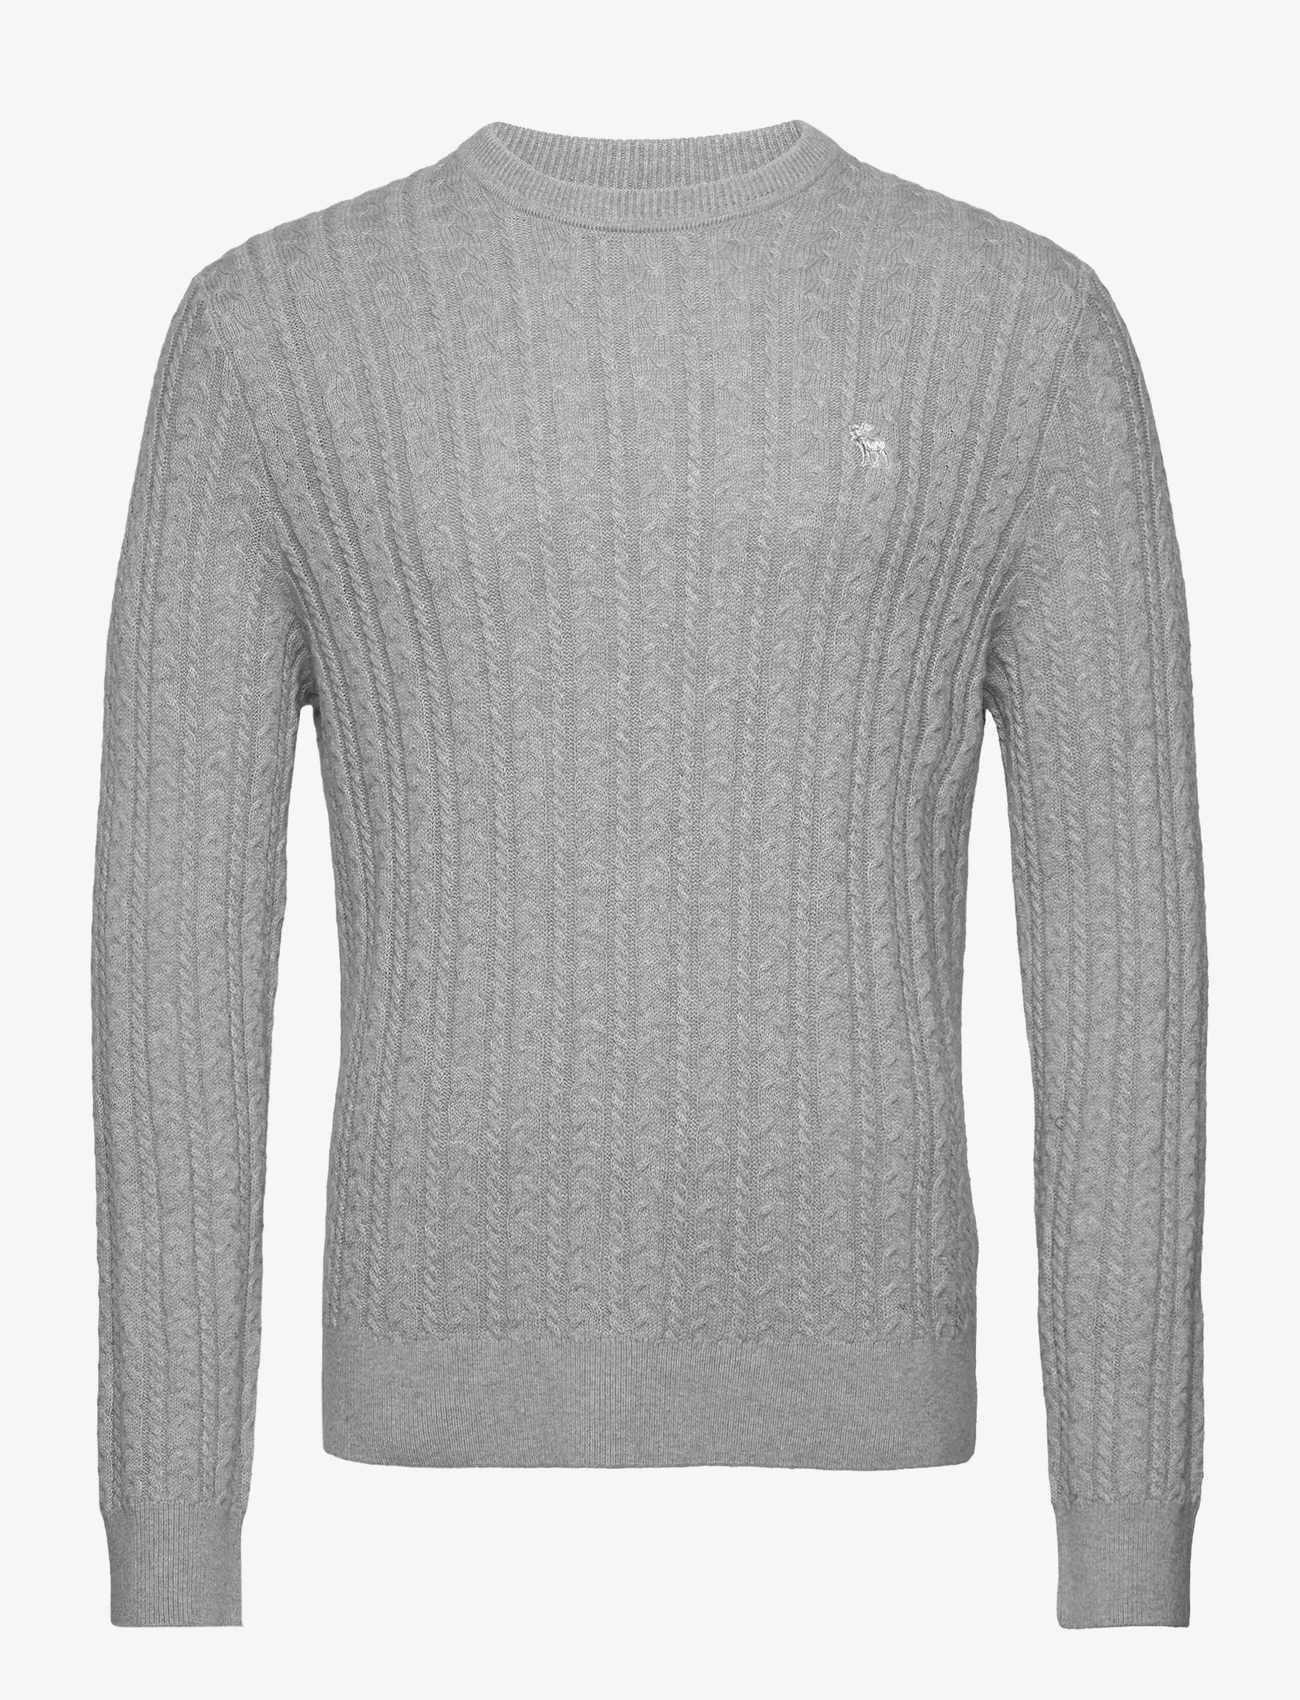 Abercrombie & Fitch - ANF MENS SWEATERS - megztinis su apvalios formos apykakle - light gray heather - 0